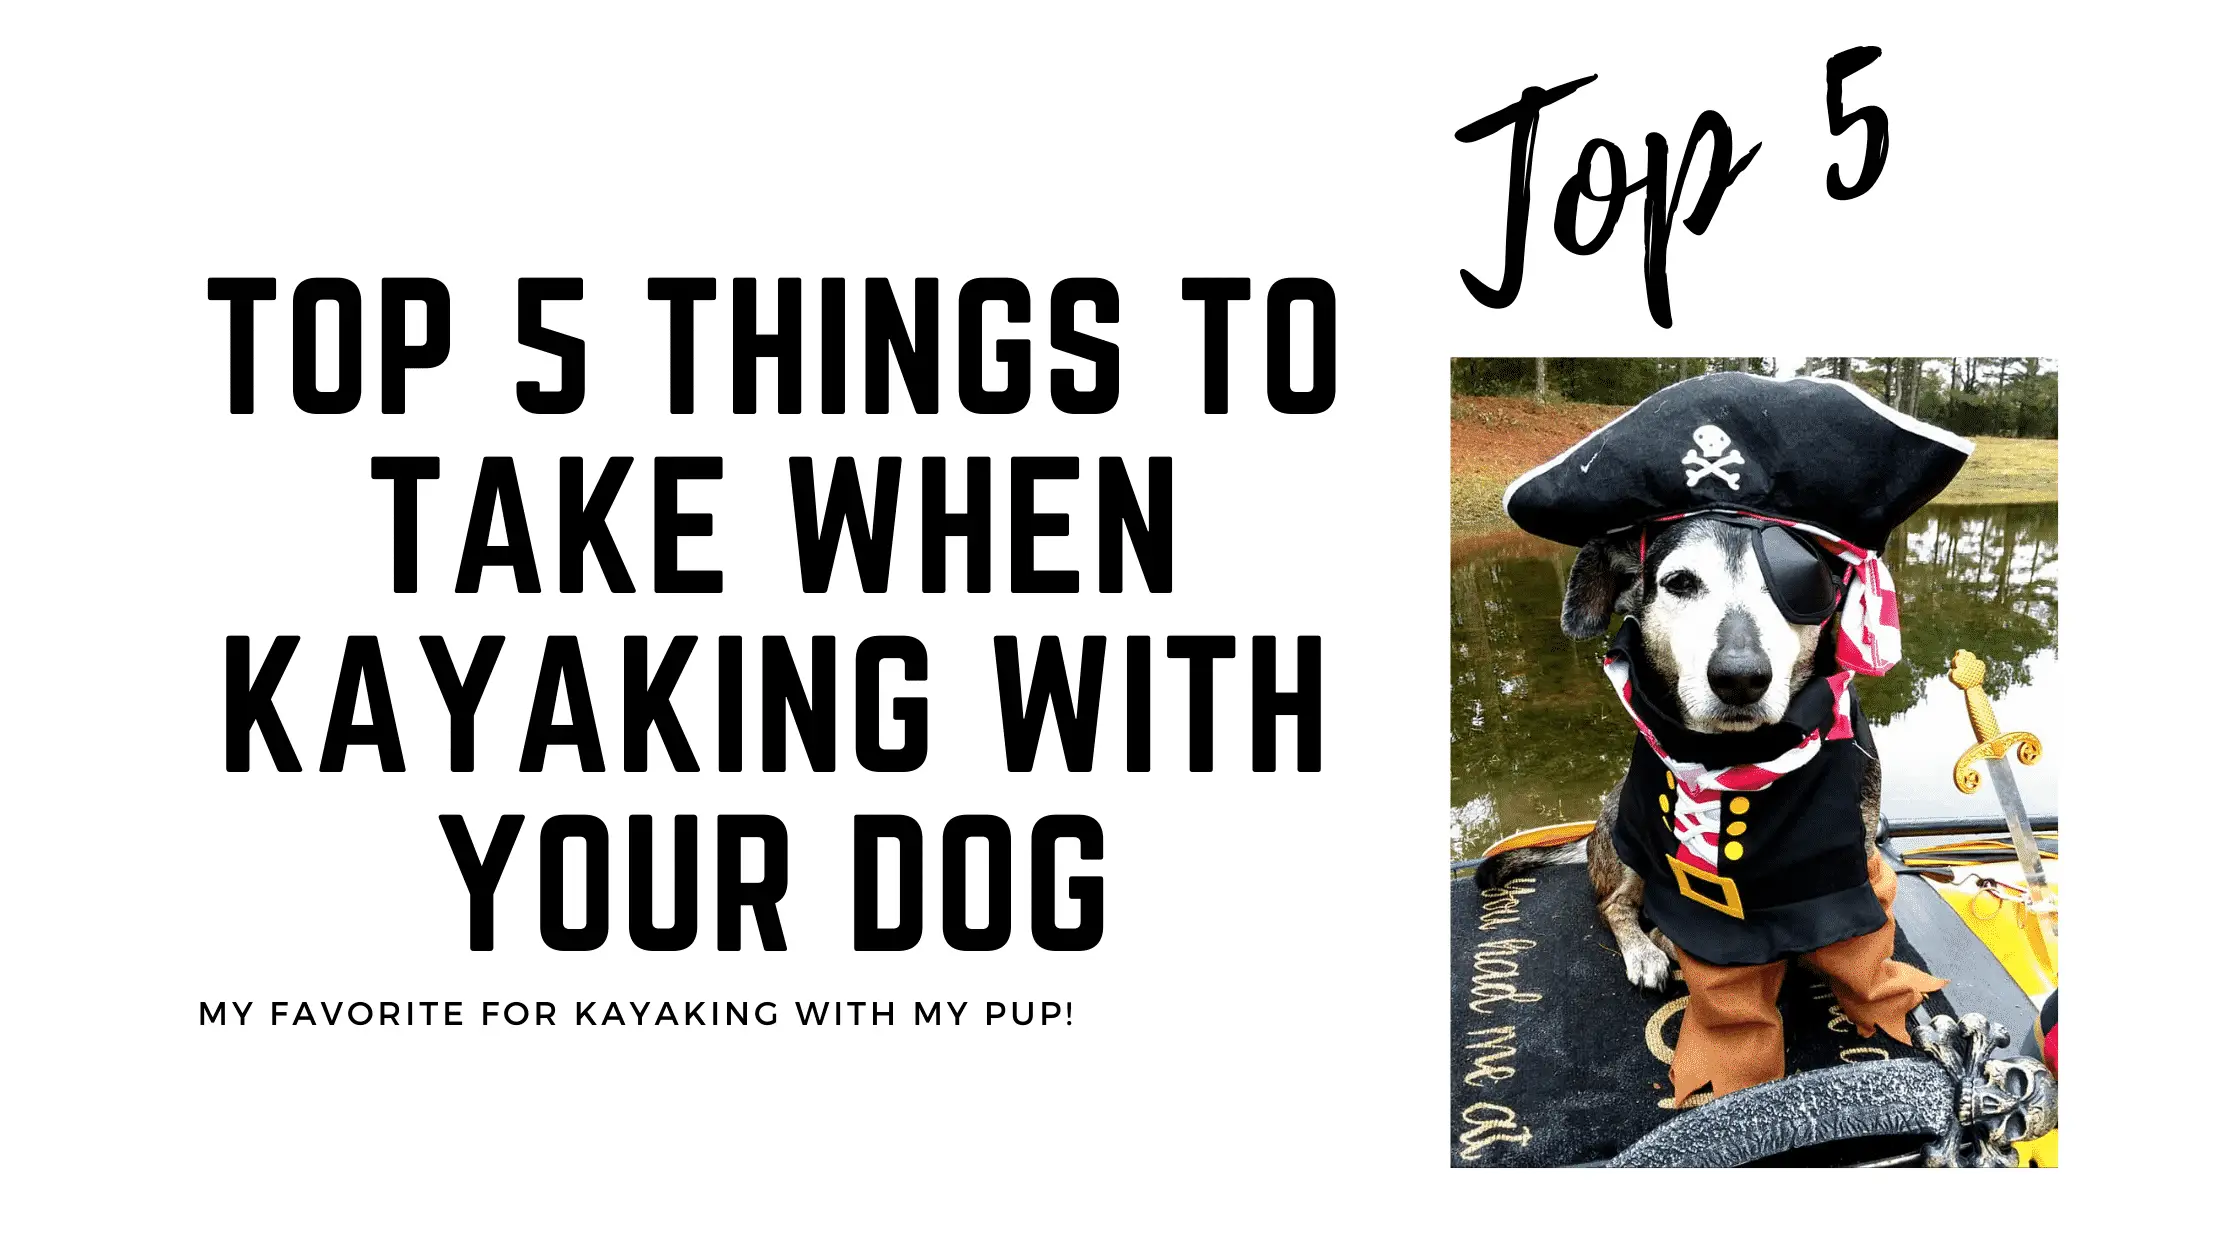 Top 5 Things to Take when Kayaking with your Dog